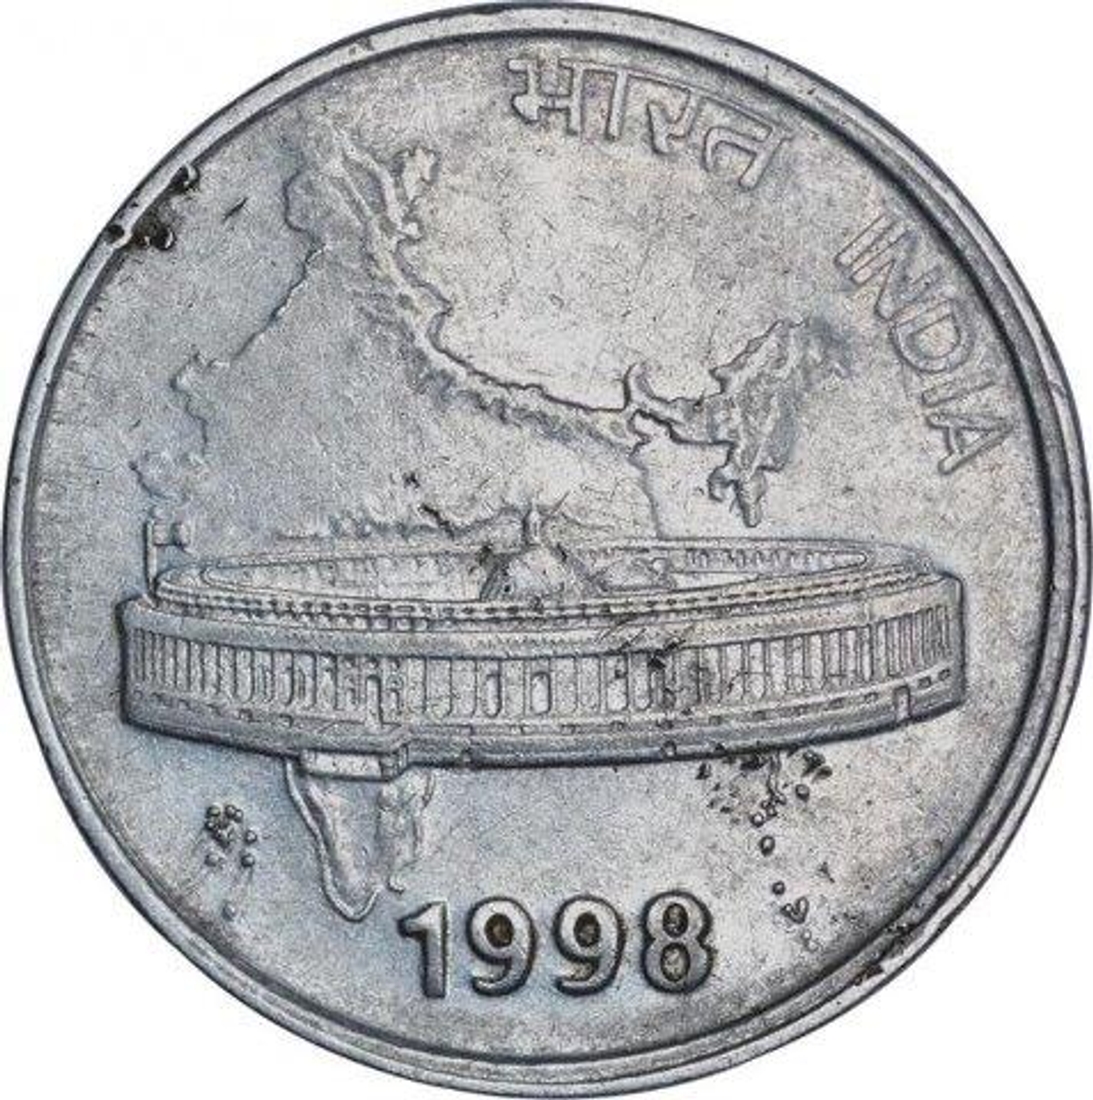 Error Steel Fifty Paise Coin of Republic India.